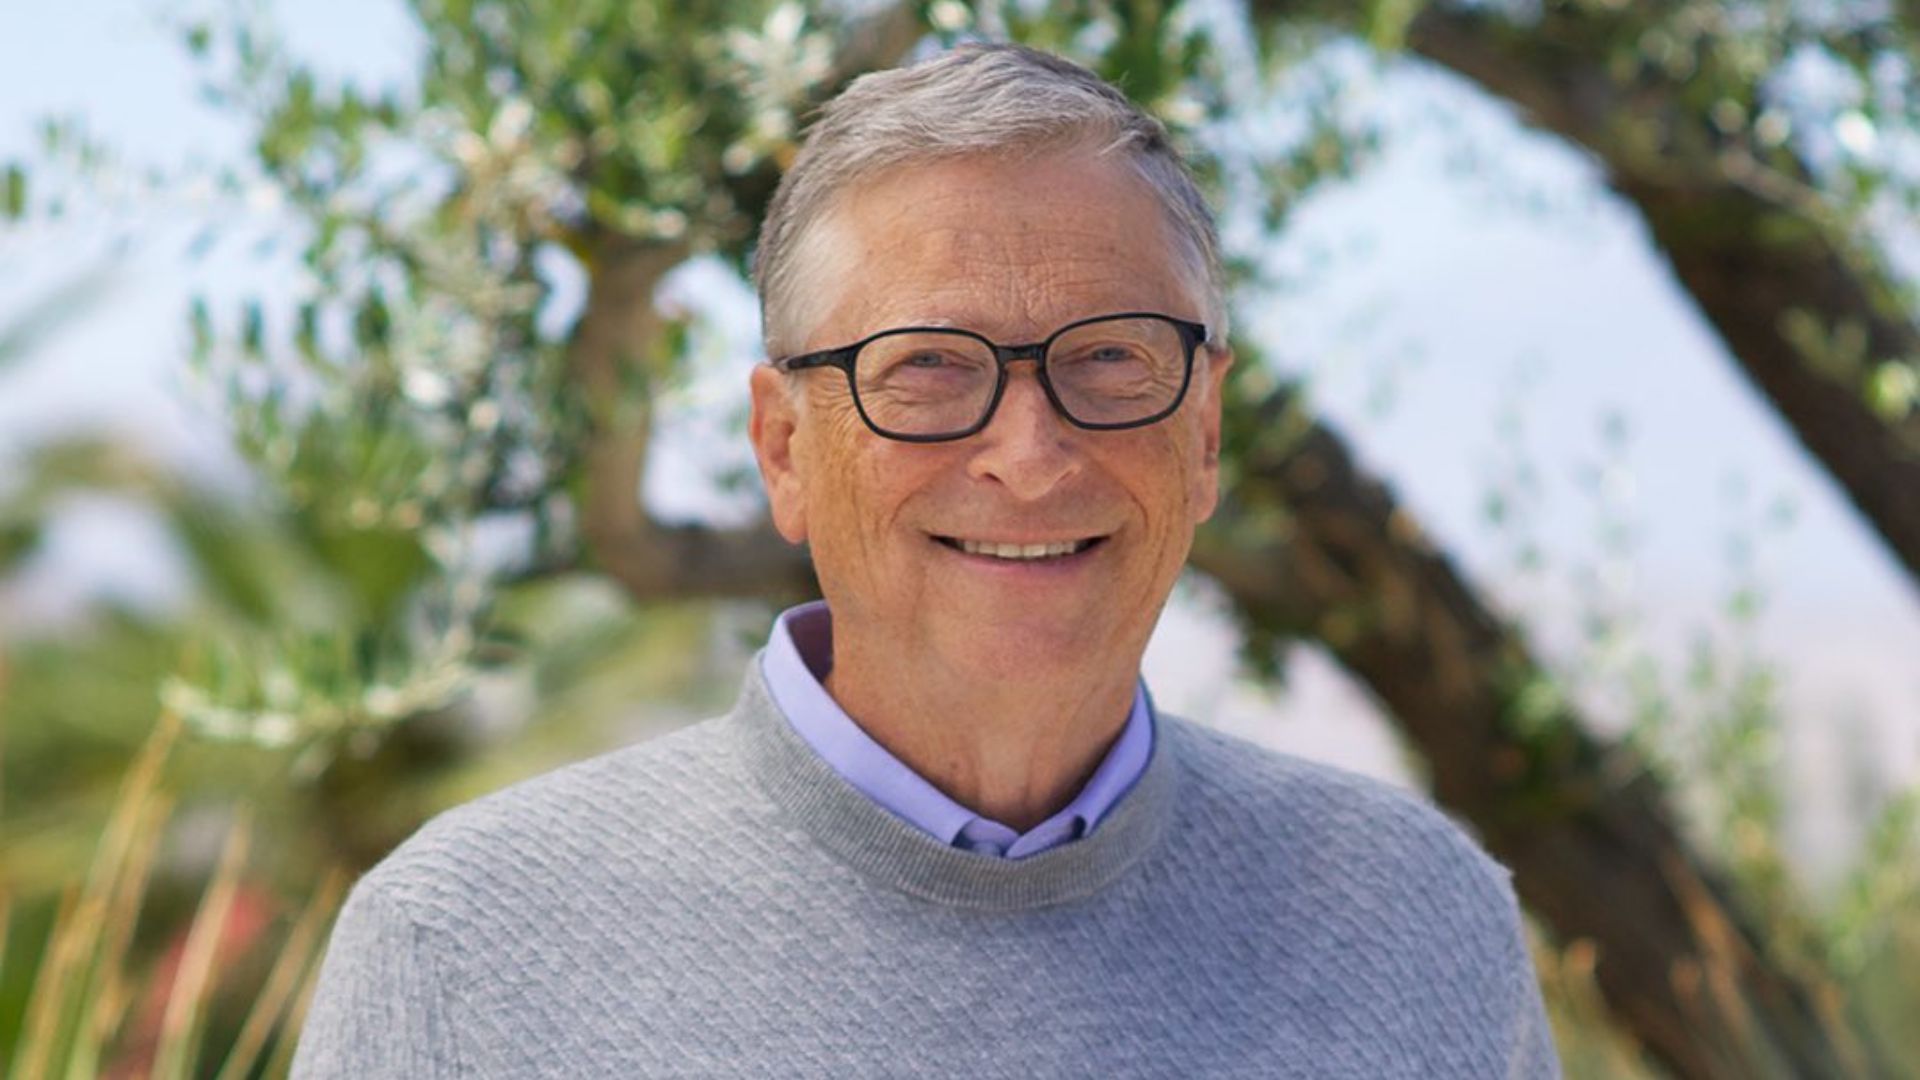 Bill Gates' net worth A 'window' into the tech tycoon's jawdropping